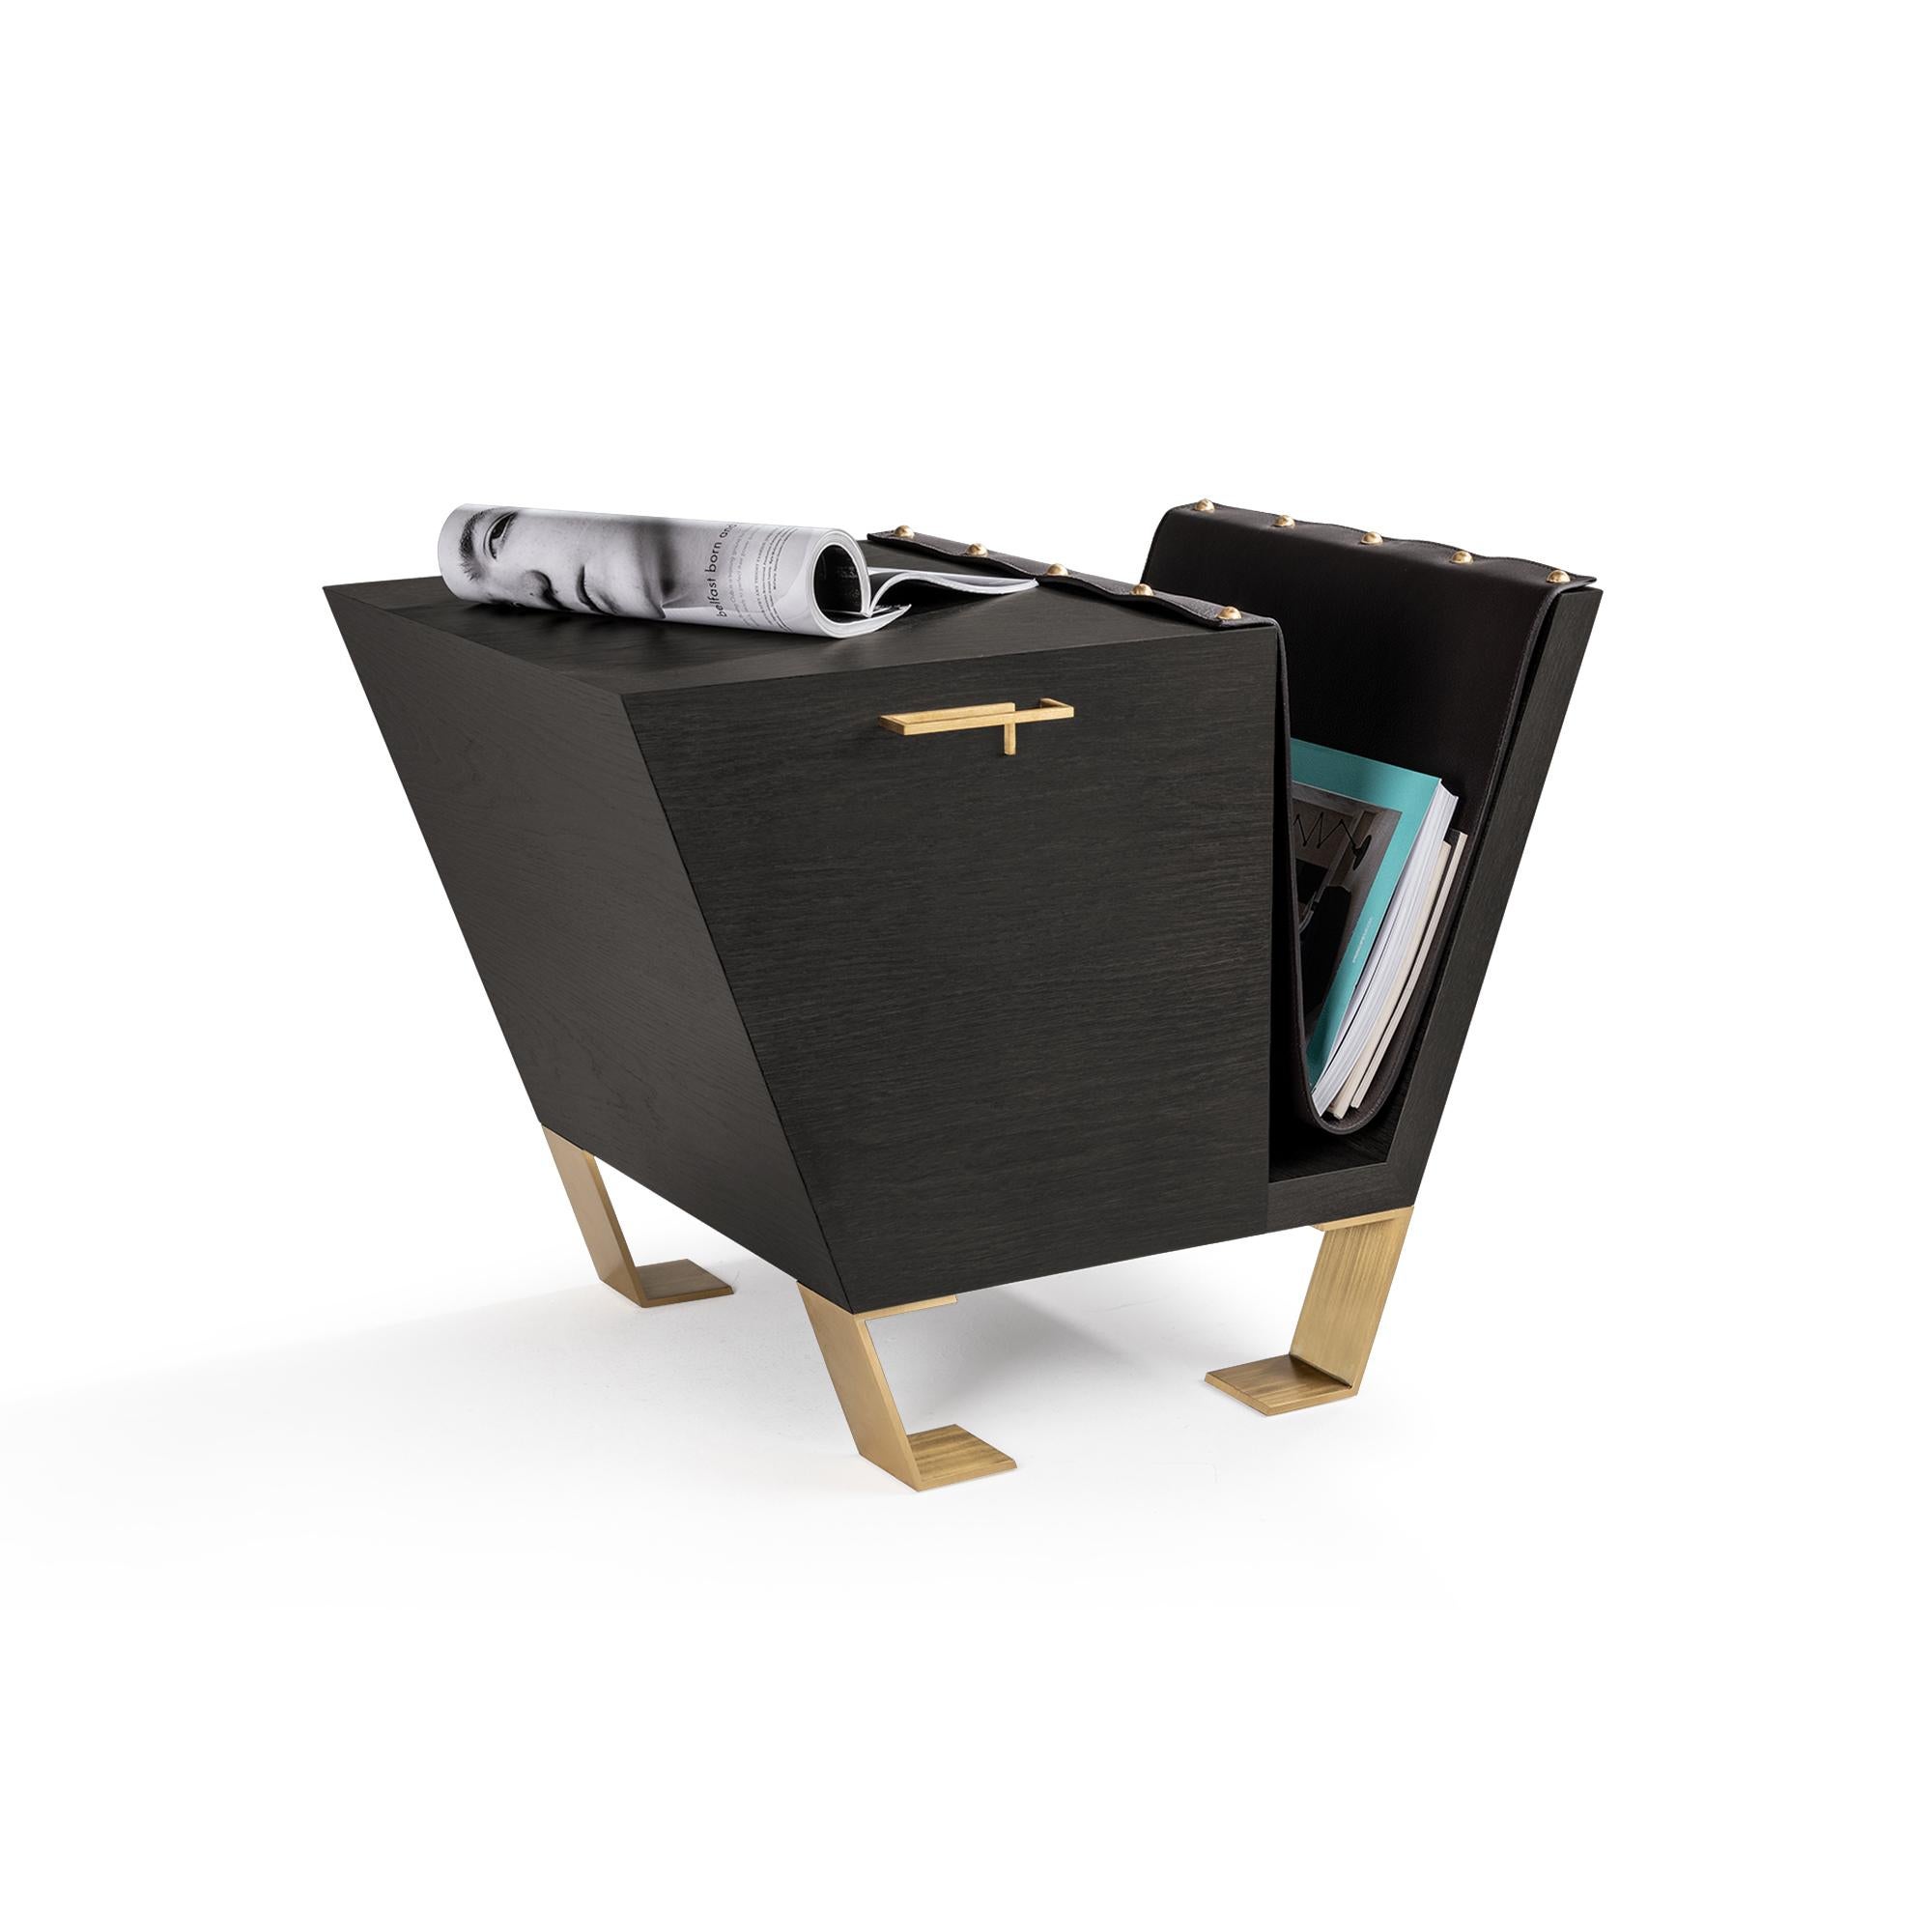 Practicality and refinement are masterfully embodied in this magazine holder that completes the Fourmosa credenza but still maintains all its charm and efficacy when used alone. The wood and real leather touches give it a stunning look but without